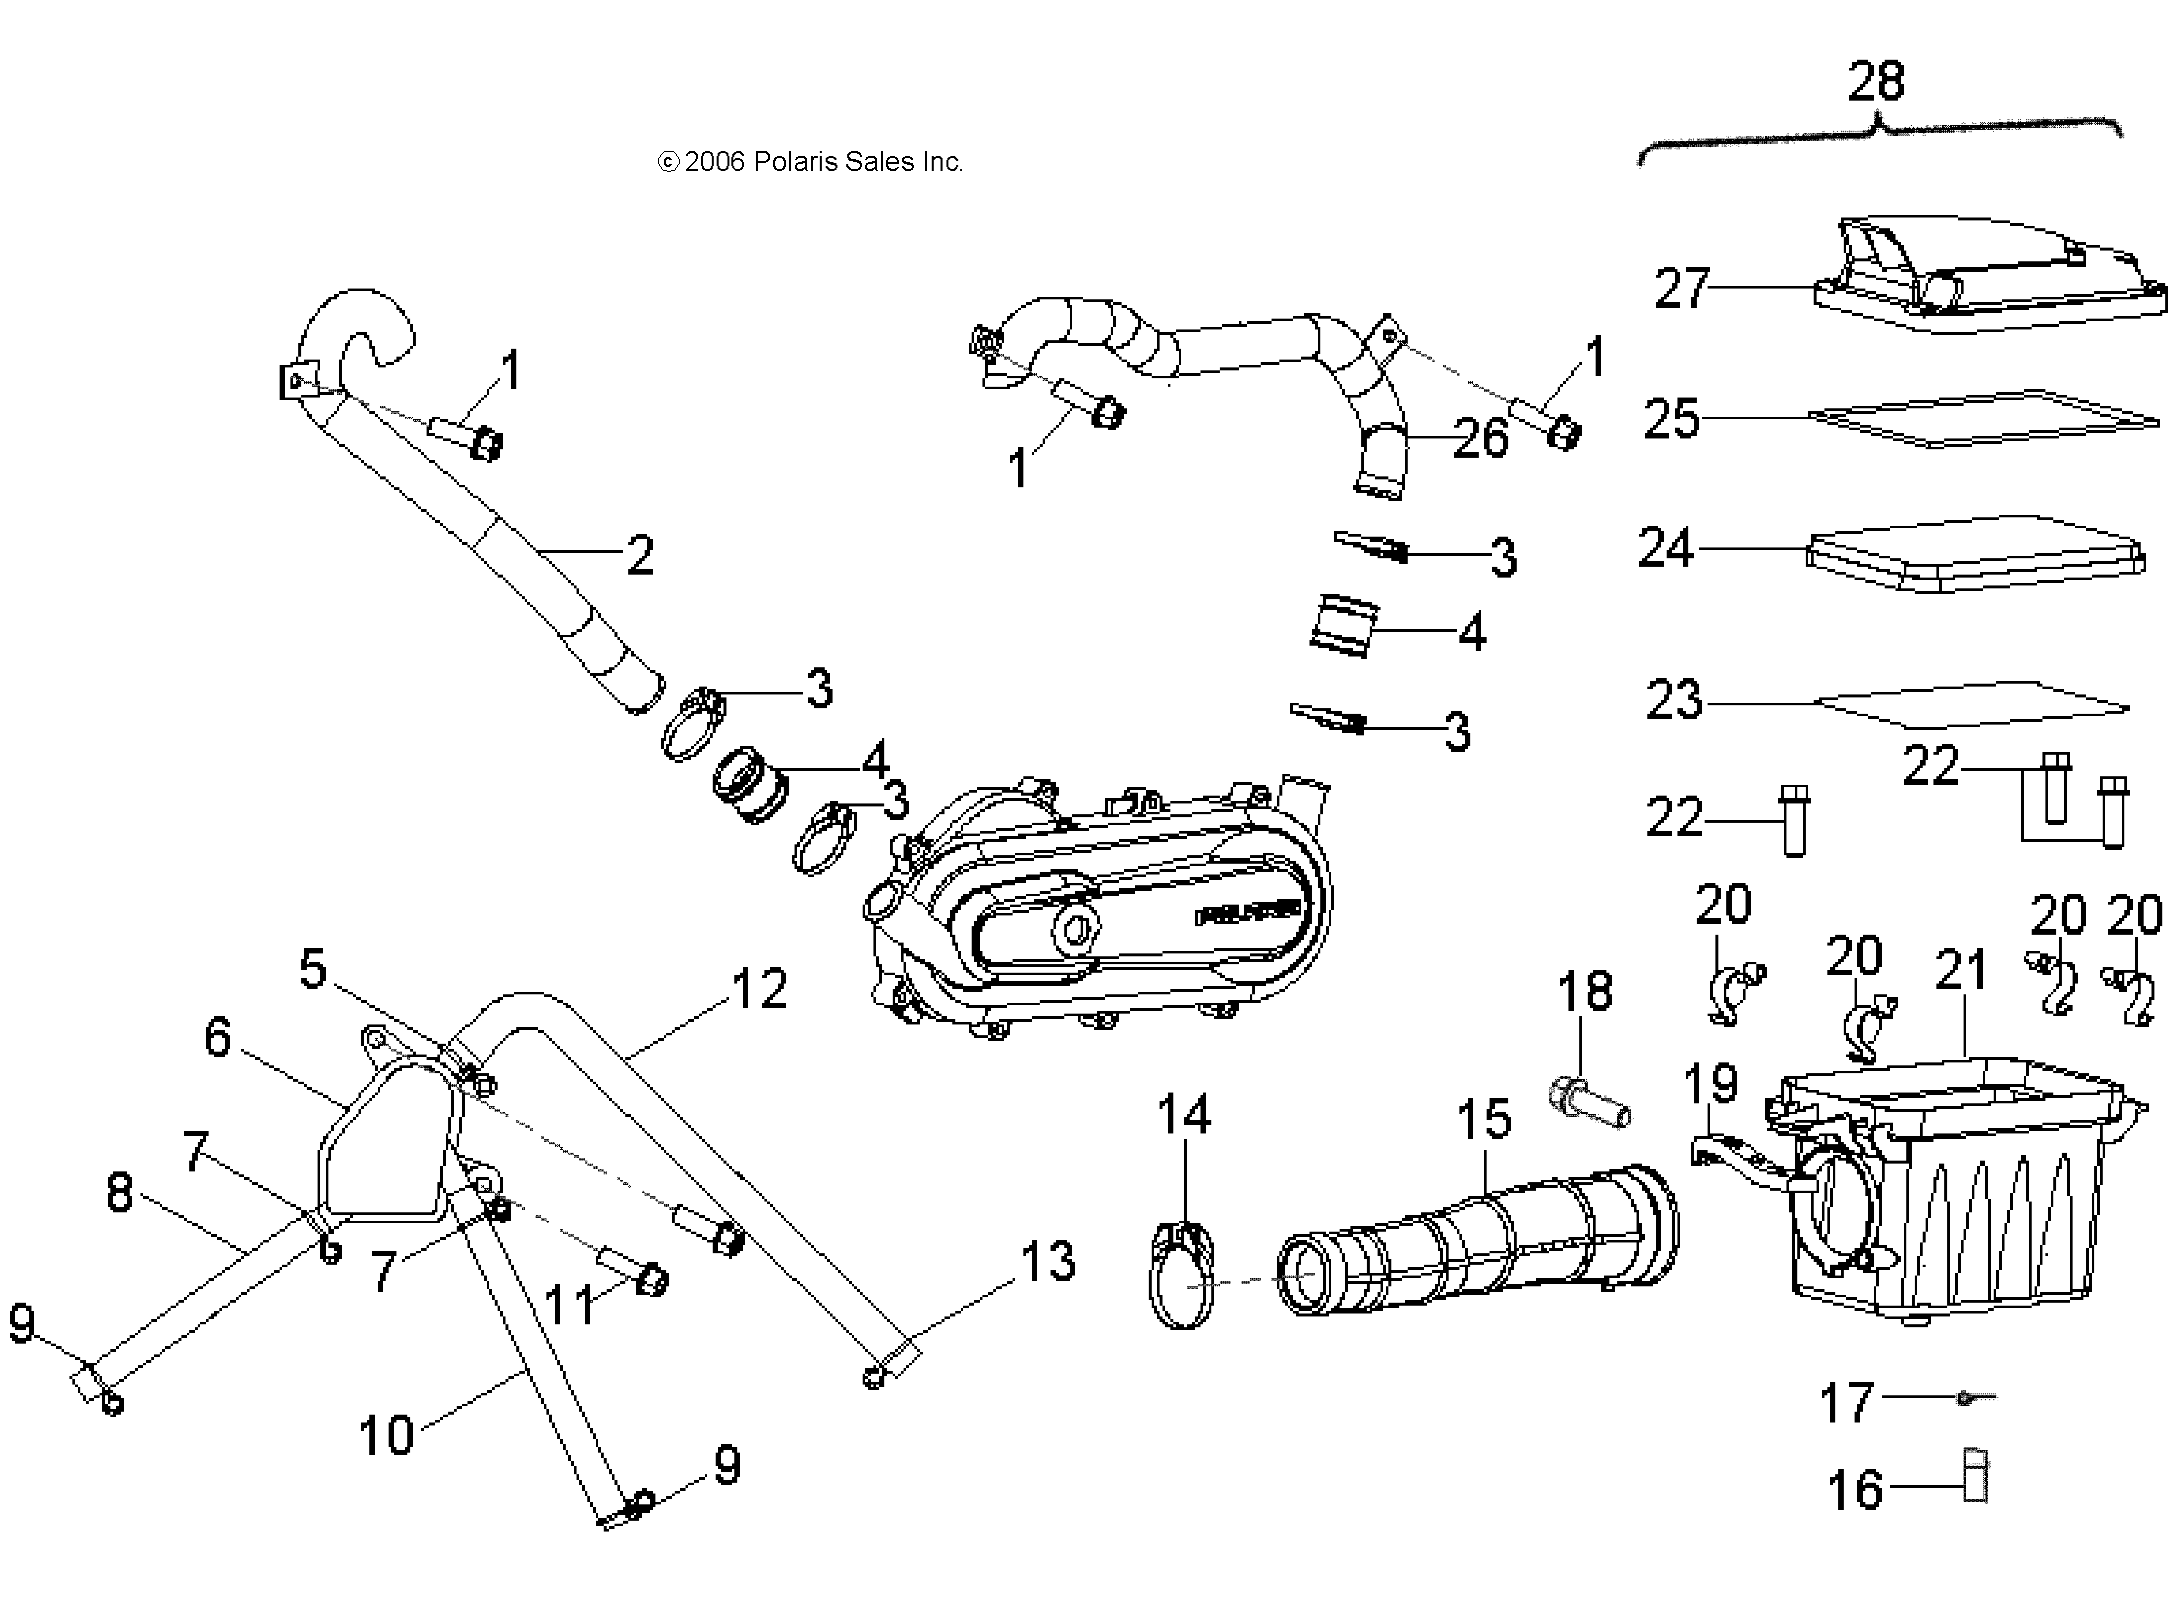 Part Number : 0453484 AIRBOX COVER GASKET